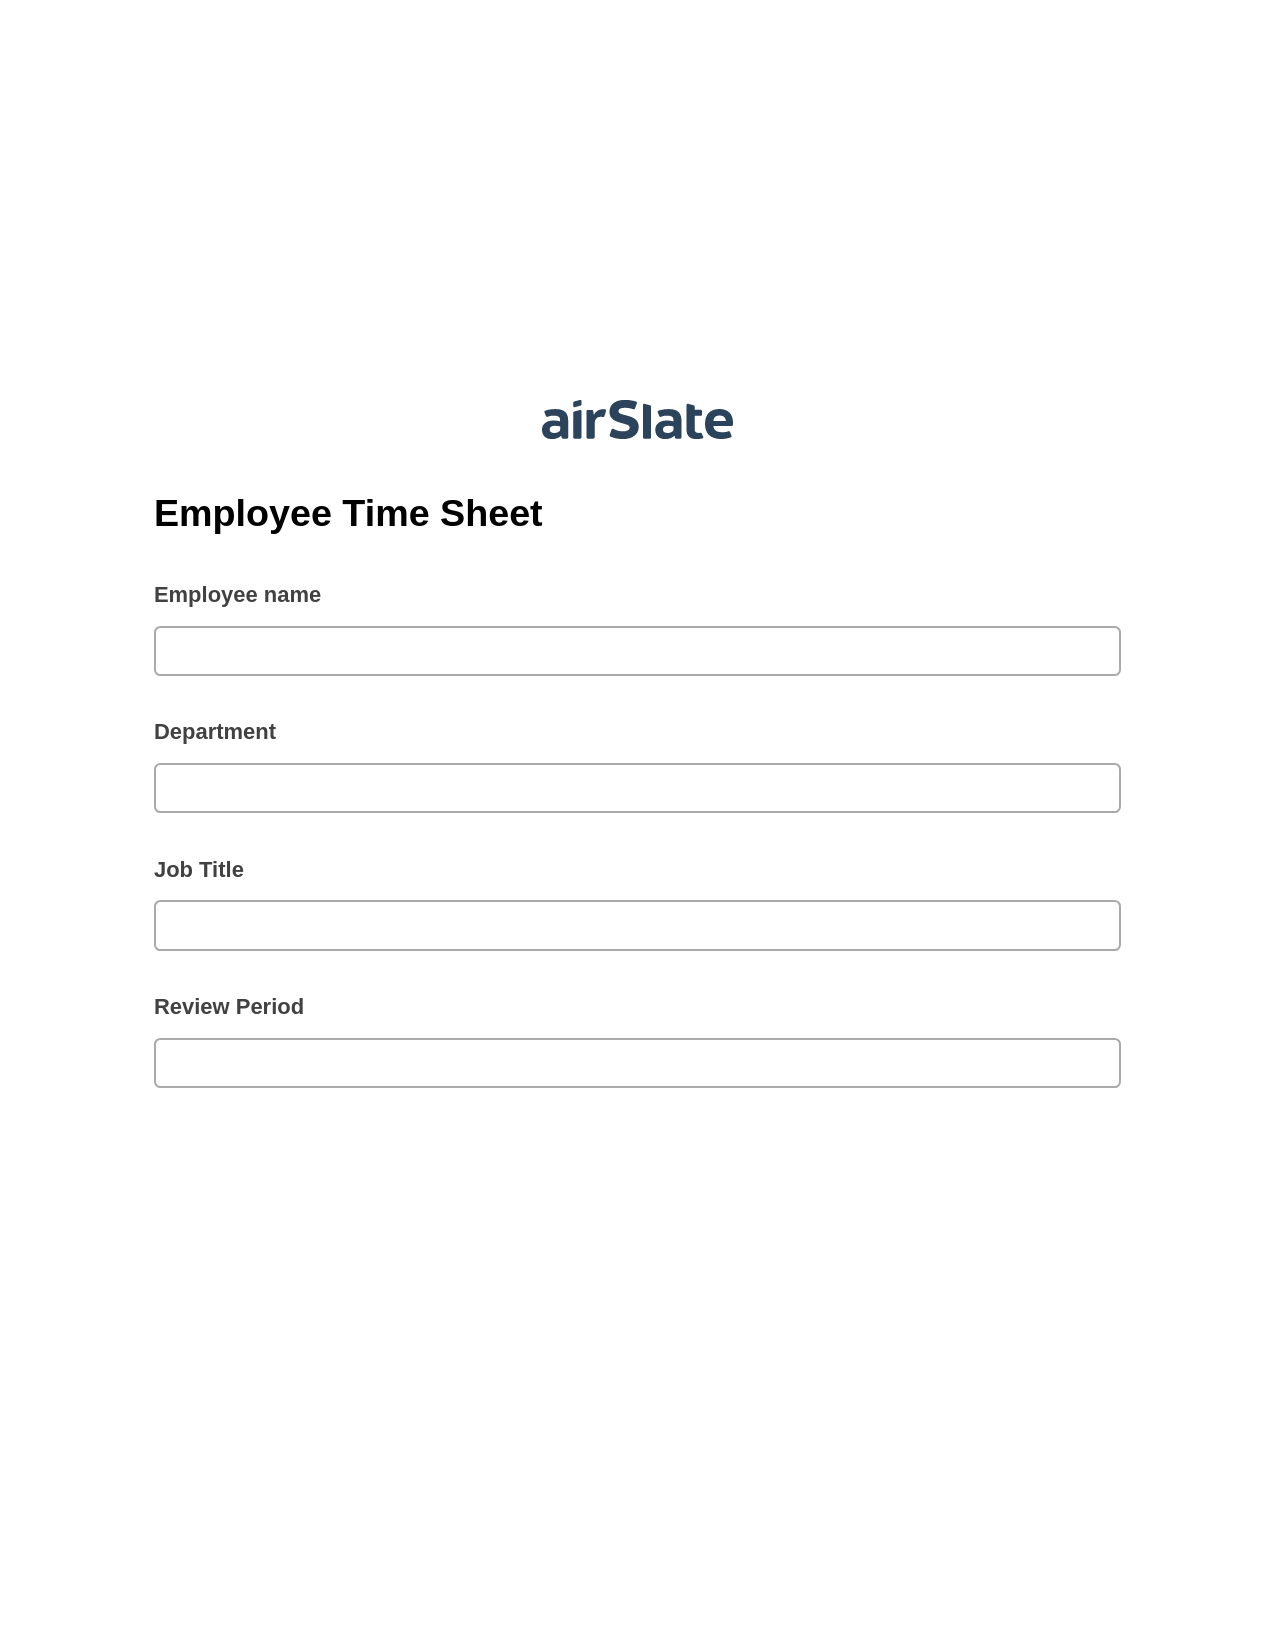 Employee Time Sheet Pre-fill from Litmos bot, Update Audit Trail Bot, Archive to Google Drive Bot